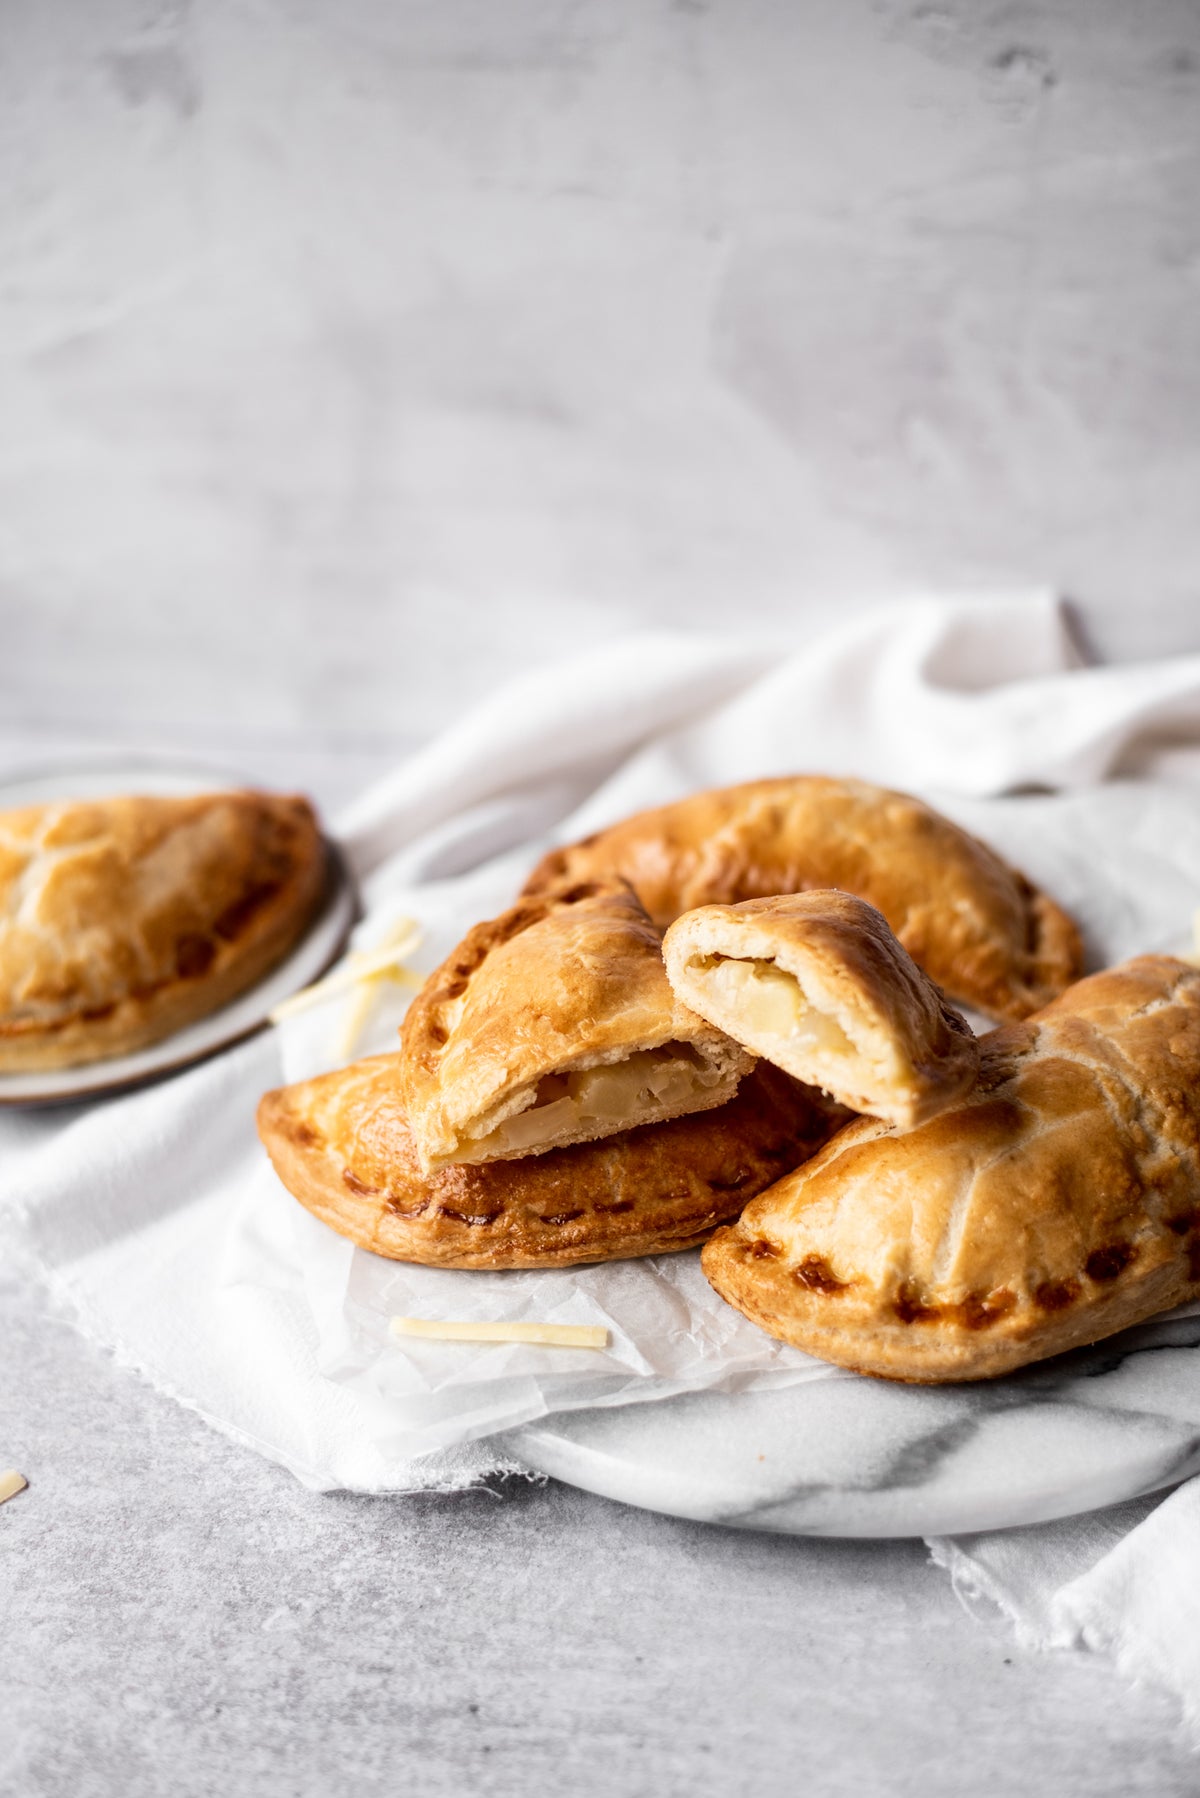 Cheese & Onion Pasty Recipe | How to Make Cheese and Onion Pasties ...